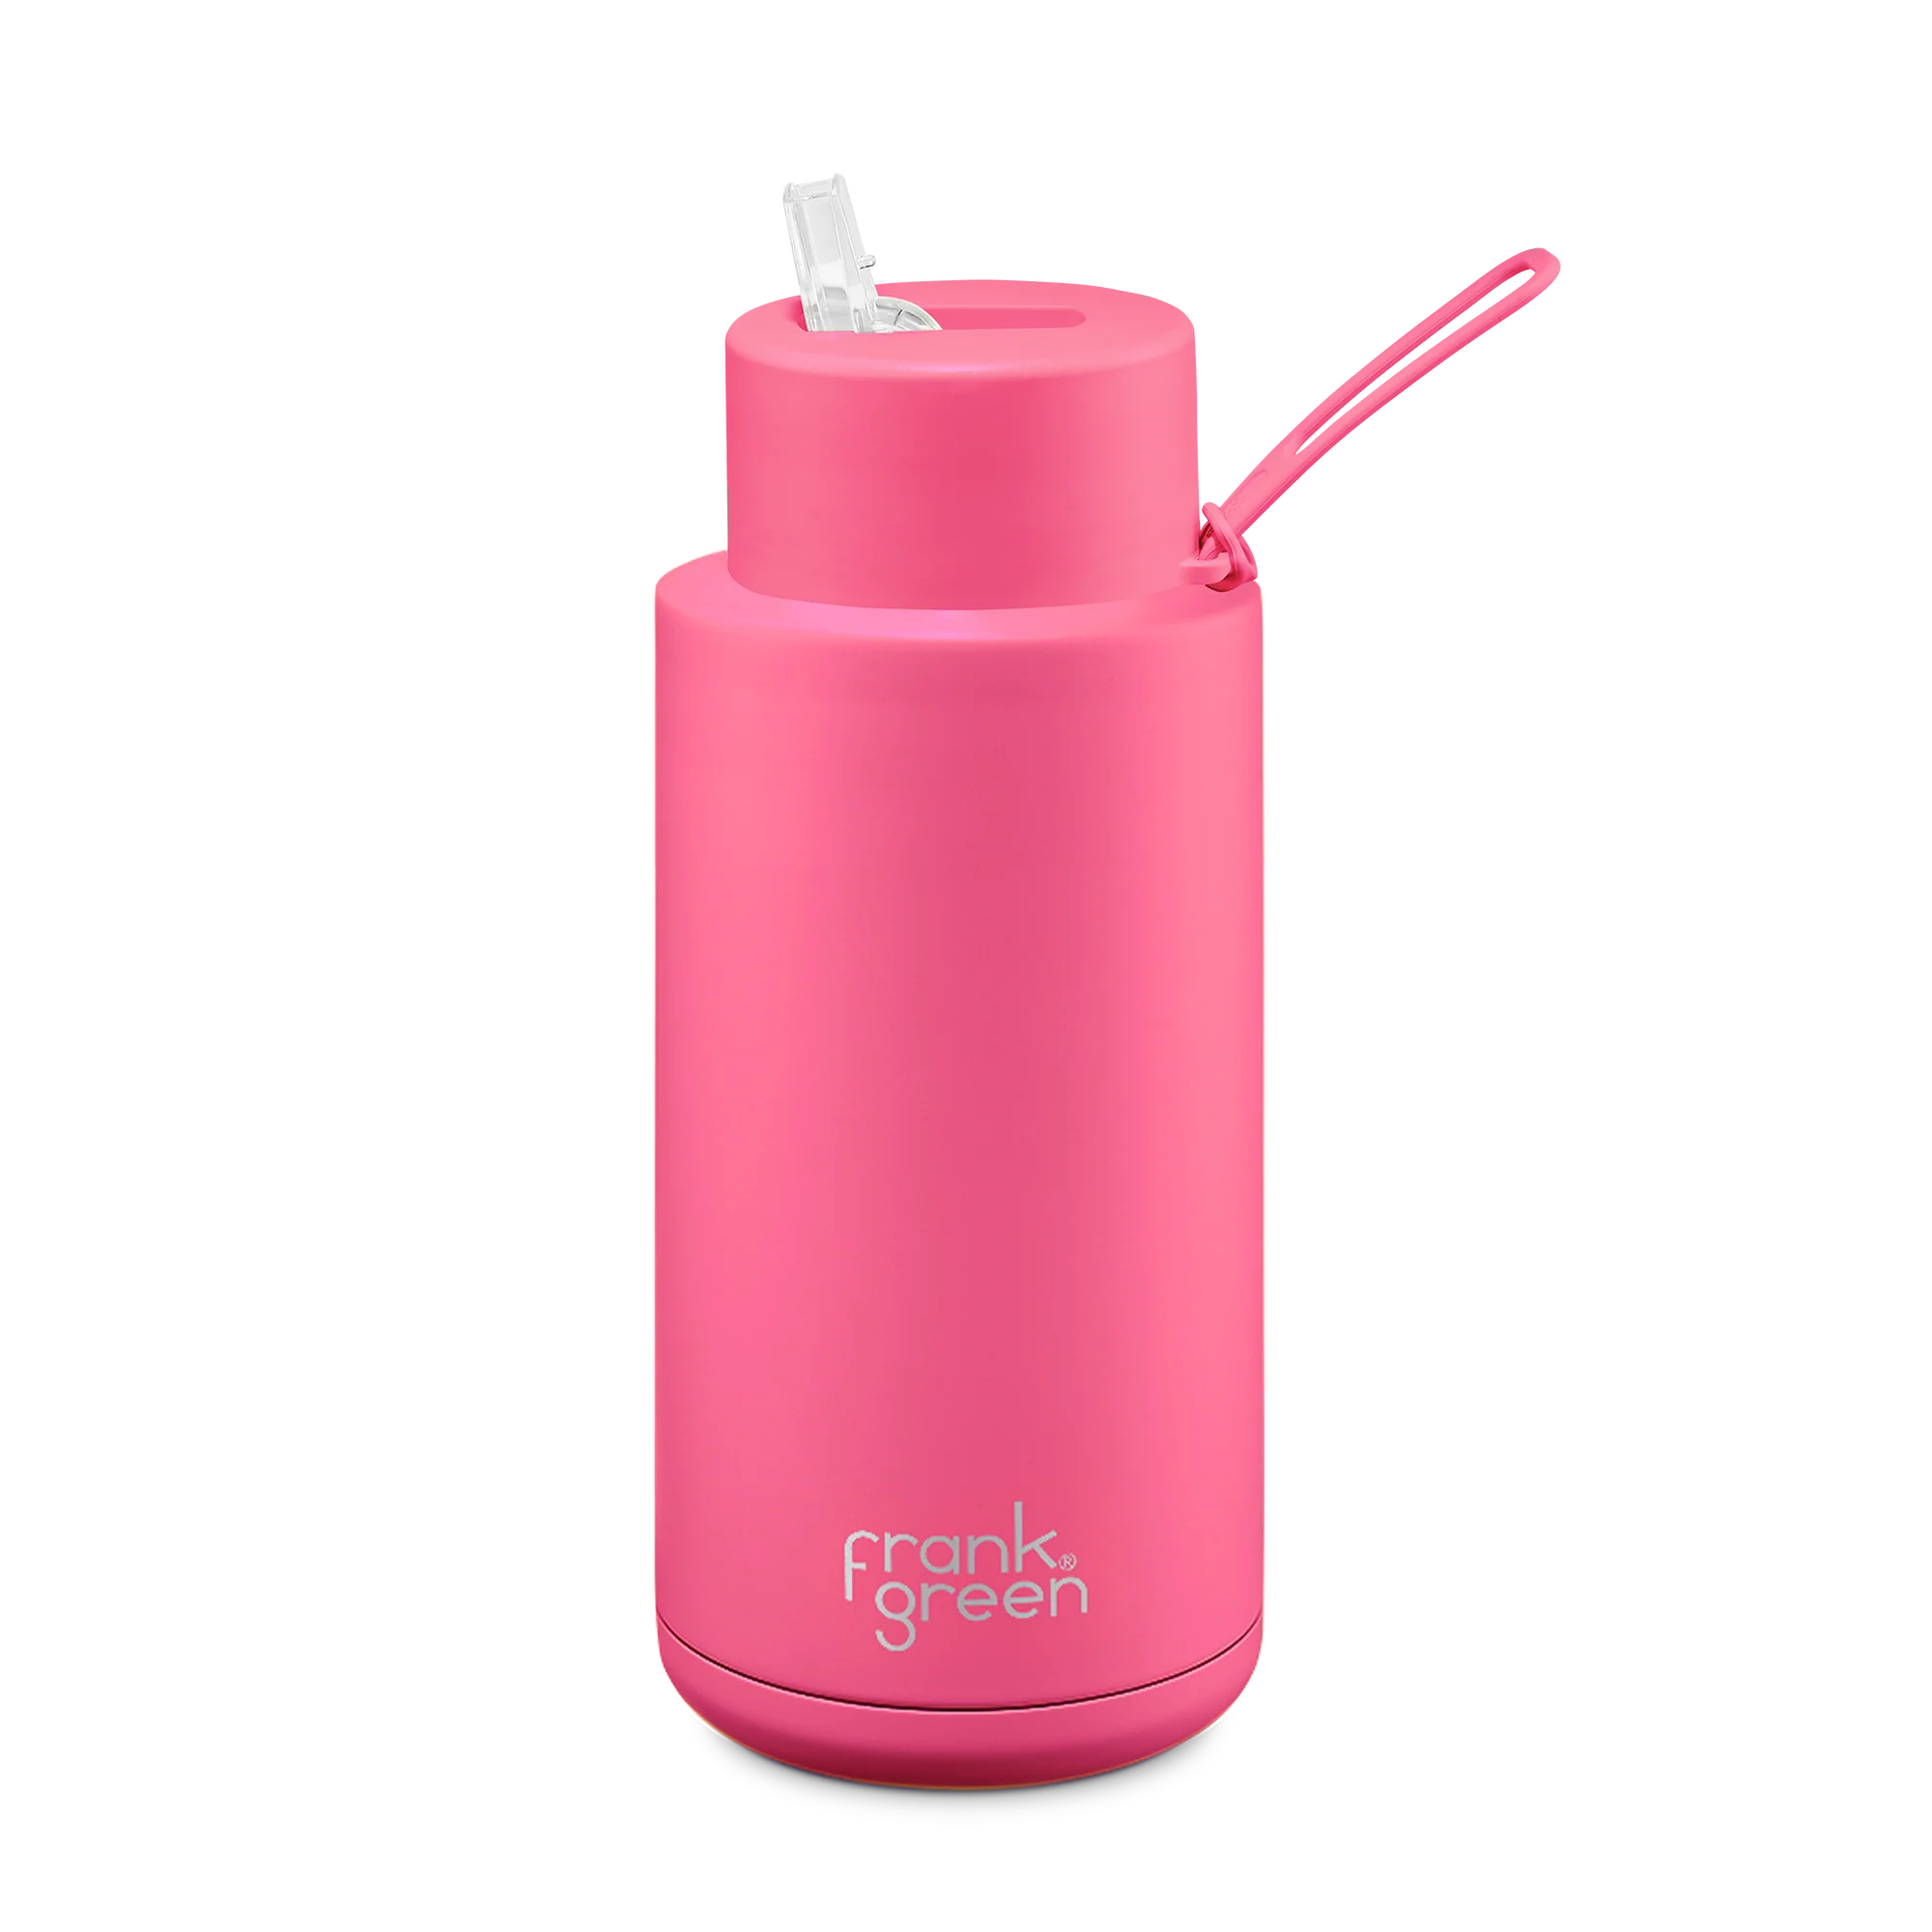 Frank Green Stainless Steel Ceramic Reusable Bottle Neon Pink With Straw And Strap 34oz/1,000ml